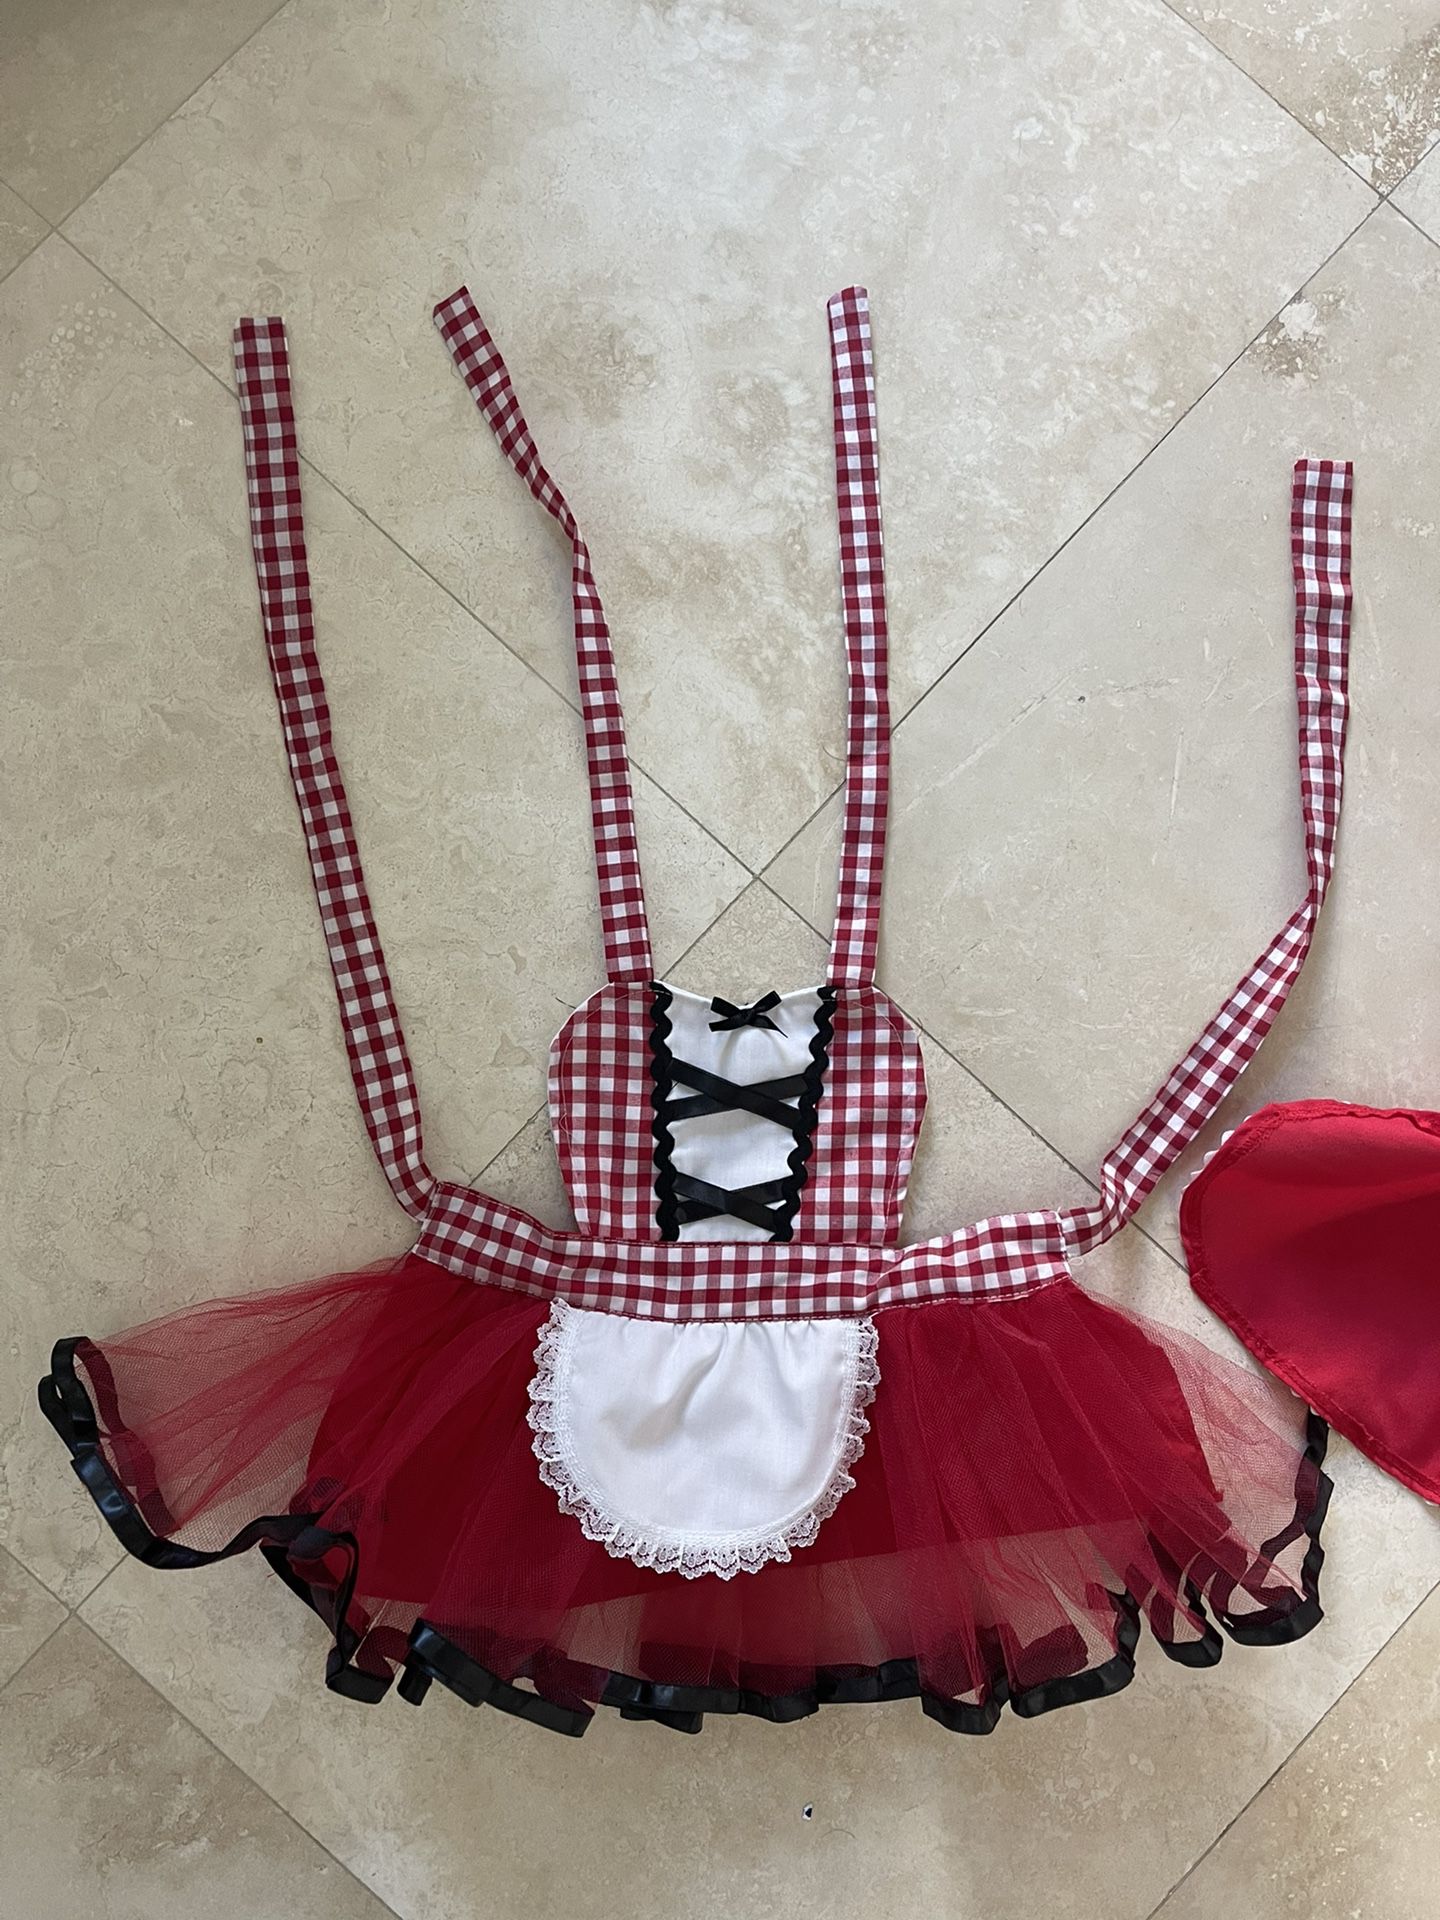 Red Riding Hood Baby Costume